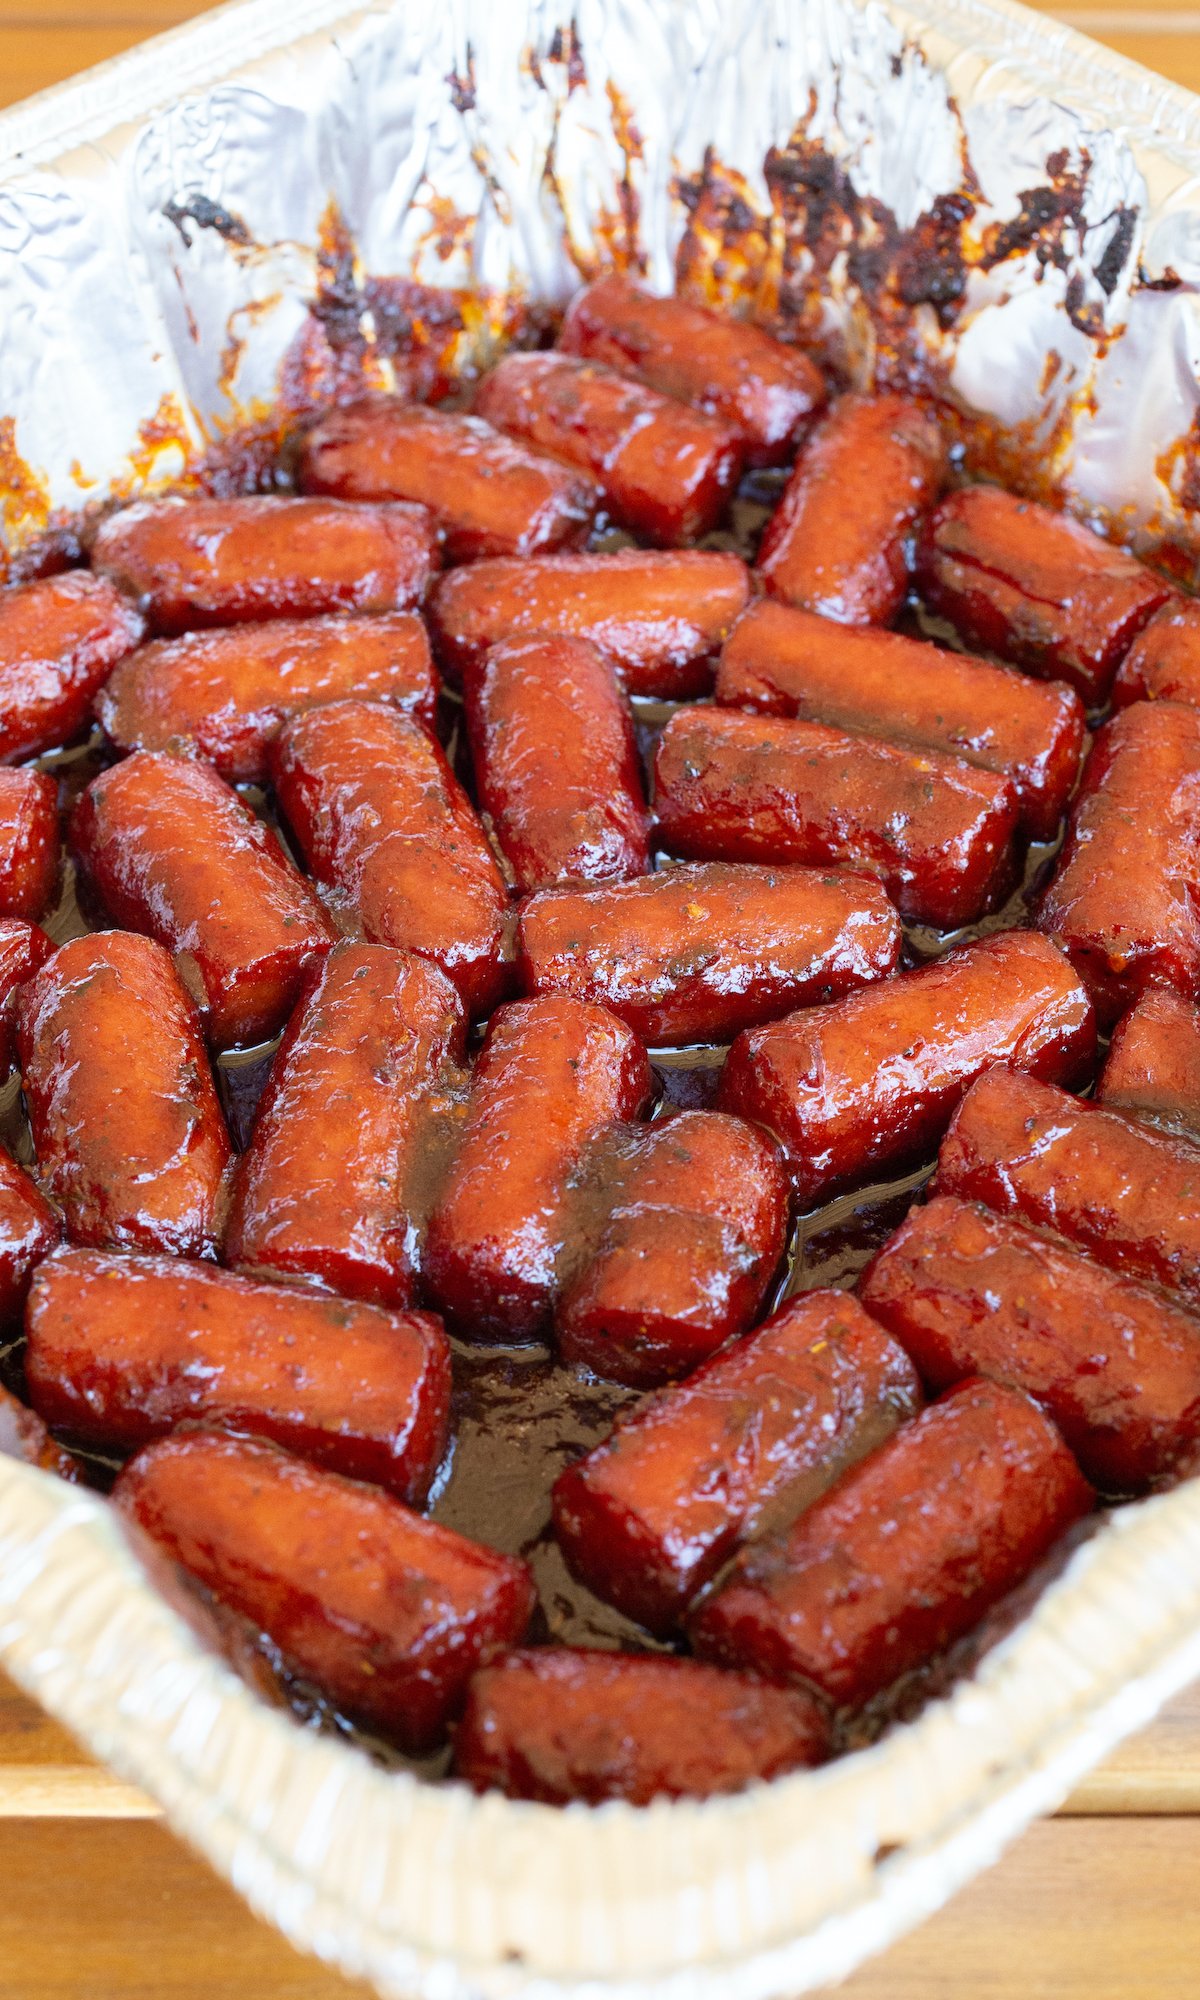 A disposable foil pan filled with hot dog burnt ends covered in thick sauce.